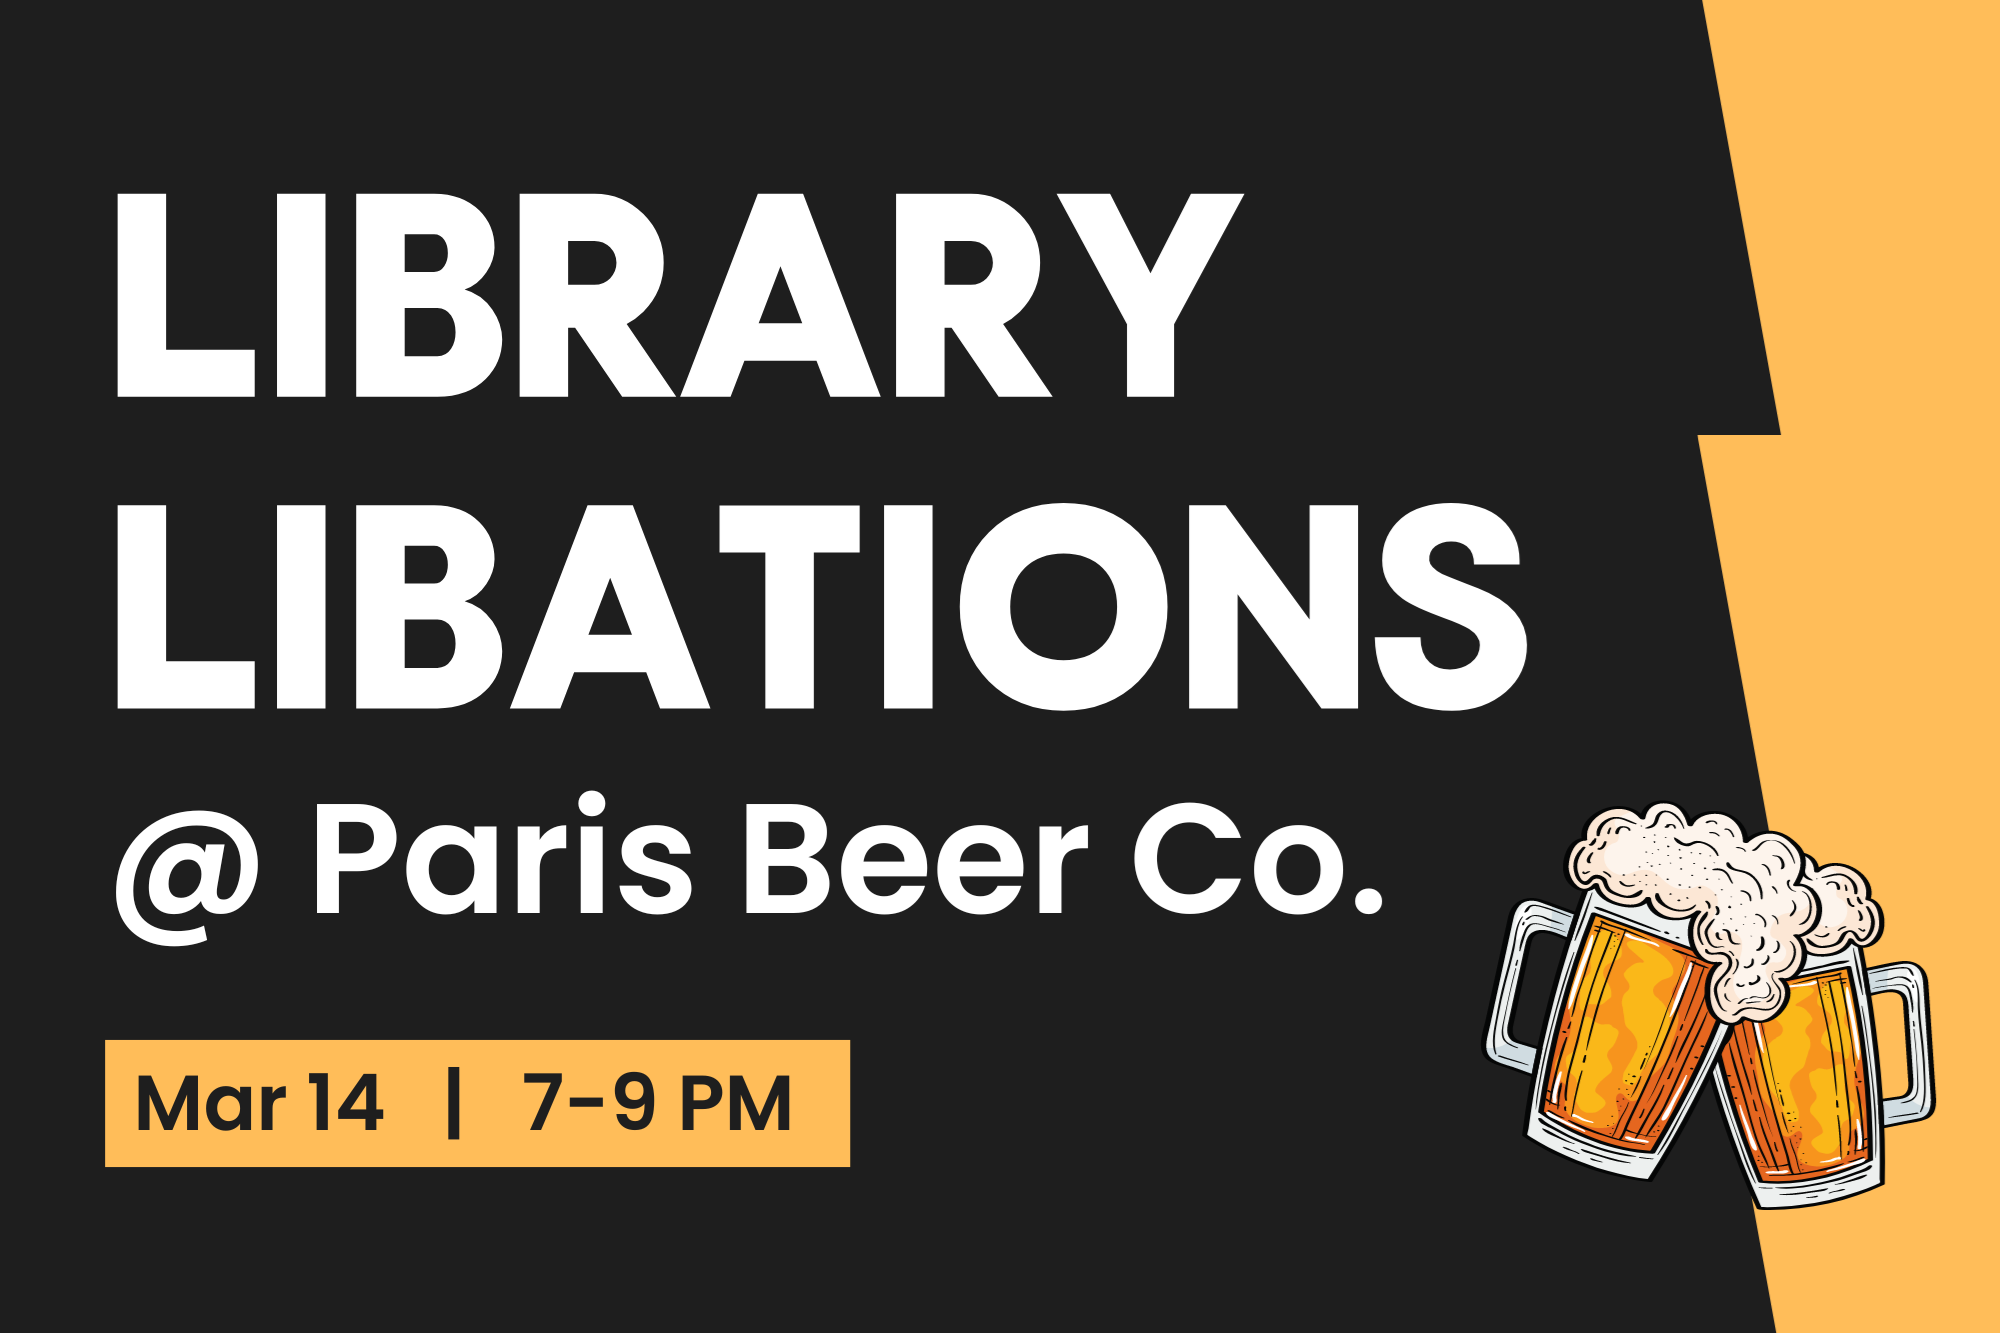 Text reads, "Library Libations at the Paris Beer Co. Feb 8, and Mar 14. 7-9 PM."